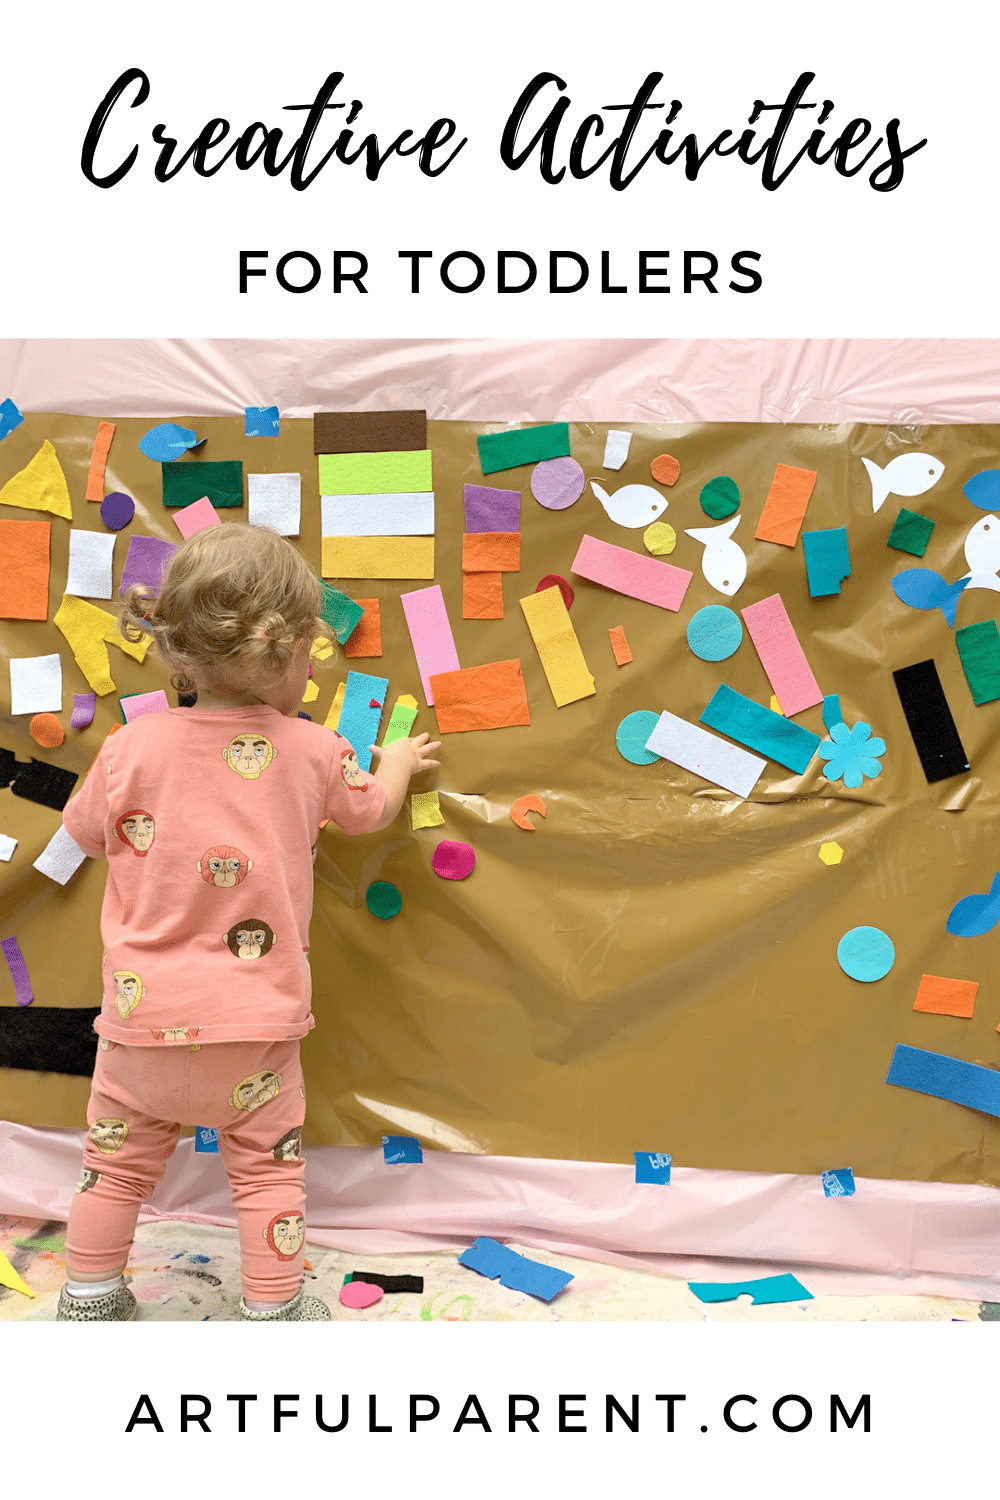 5 creative, low-clutter activities for toddlers